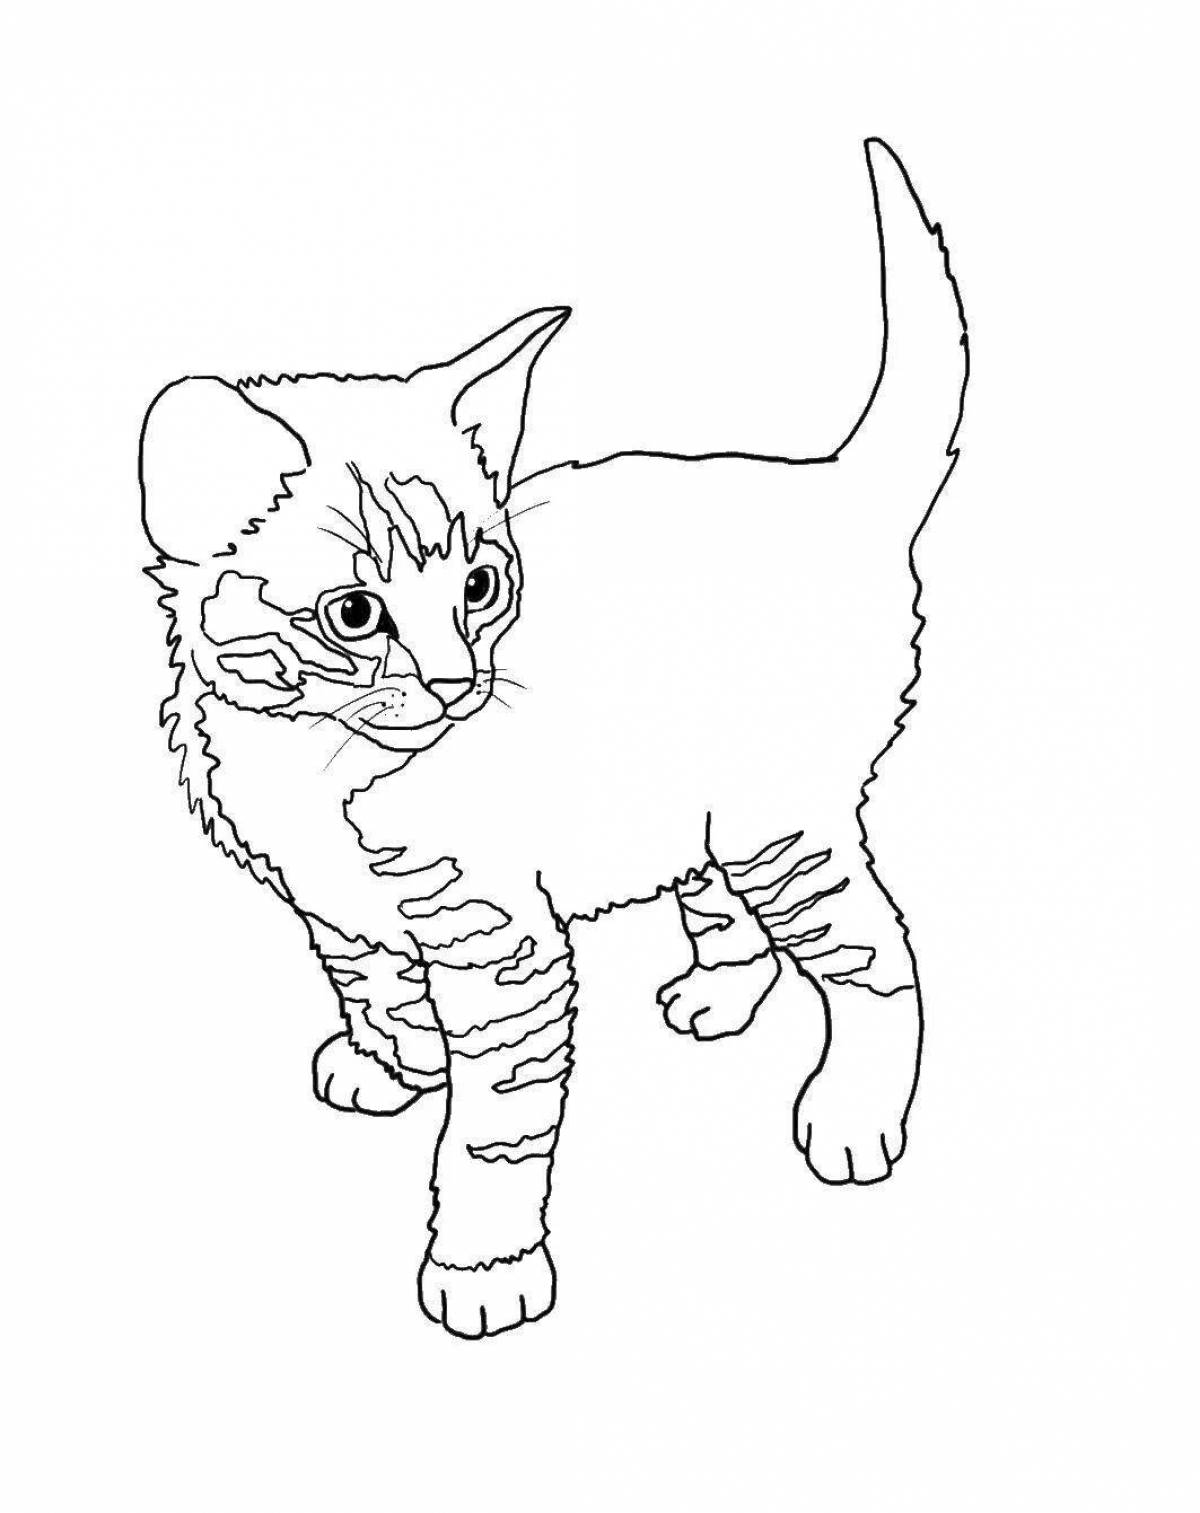 Charming kitten cat coloring book